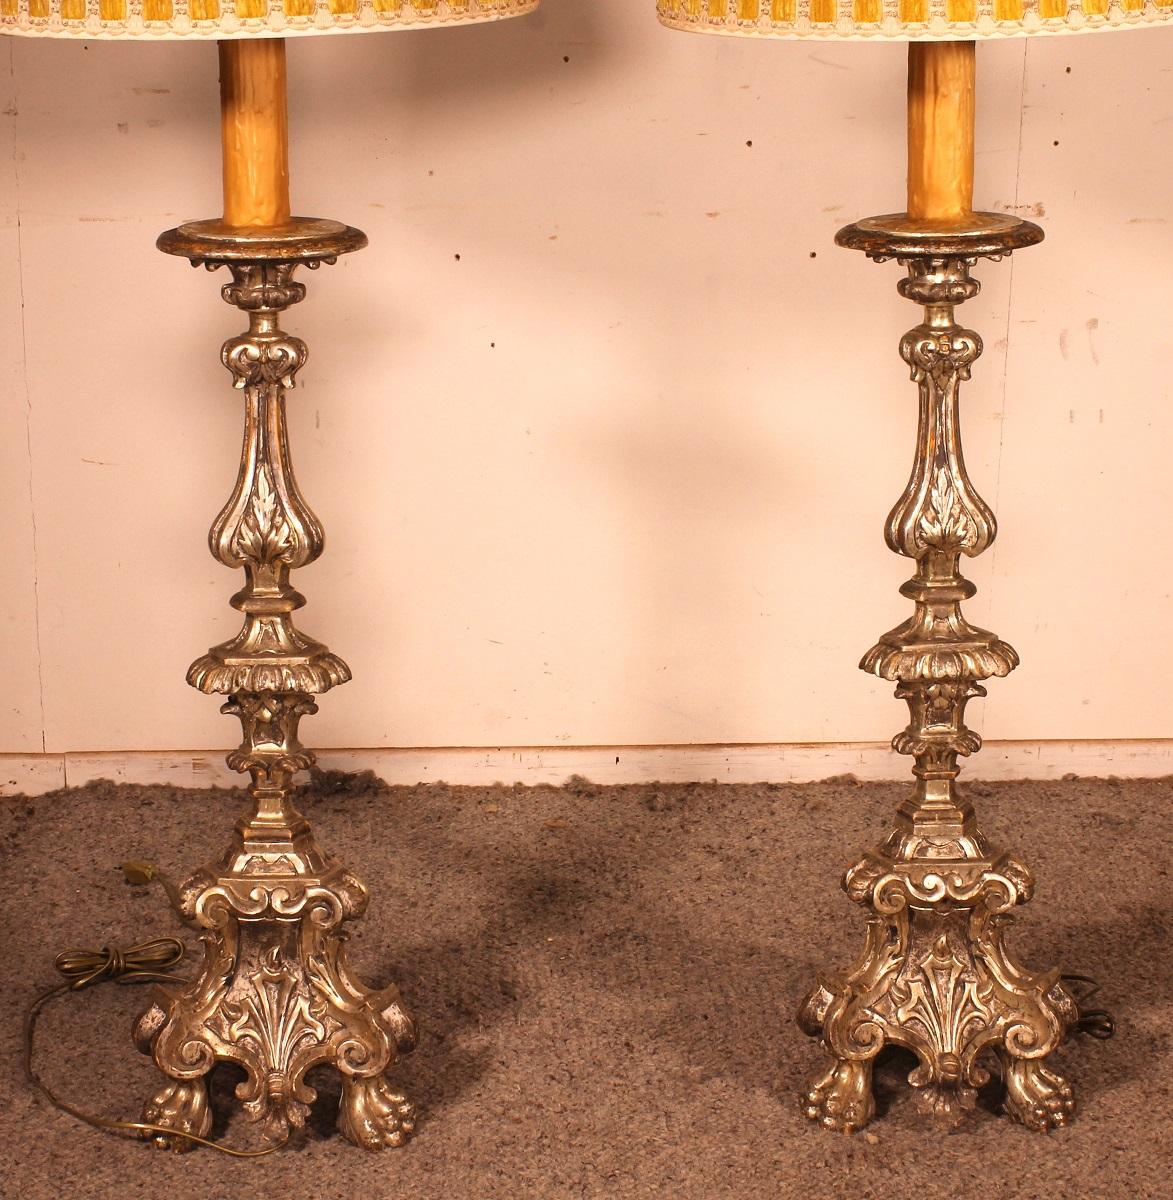 A rare pair of early 19th century silver wood torchieres from Italy.
Superb Italian Louis XV style work in carved wood.
Very good quality of carving and in magnificent condition T
The torchieres have been electrified by us and are ready to